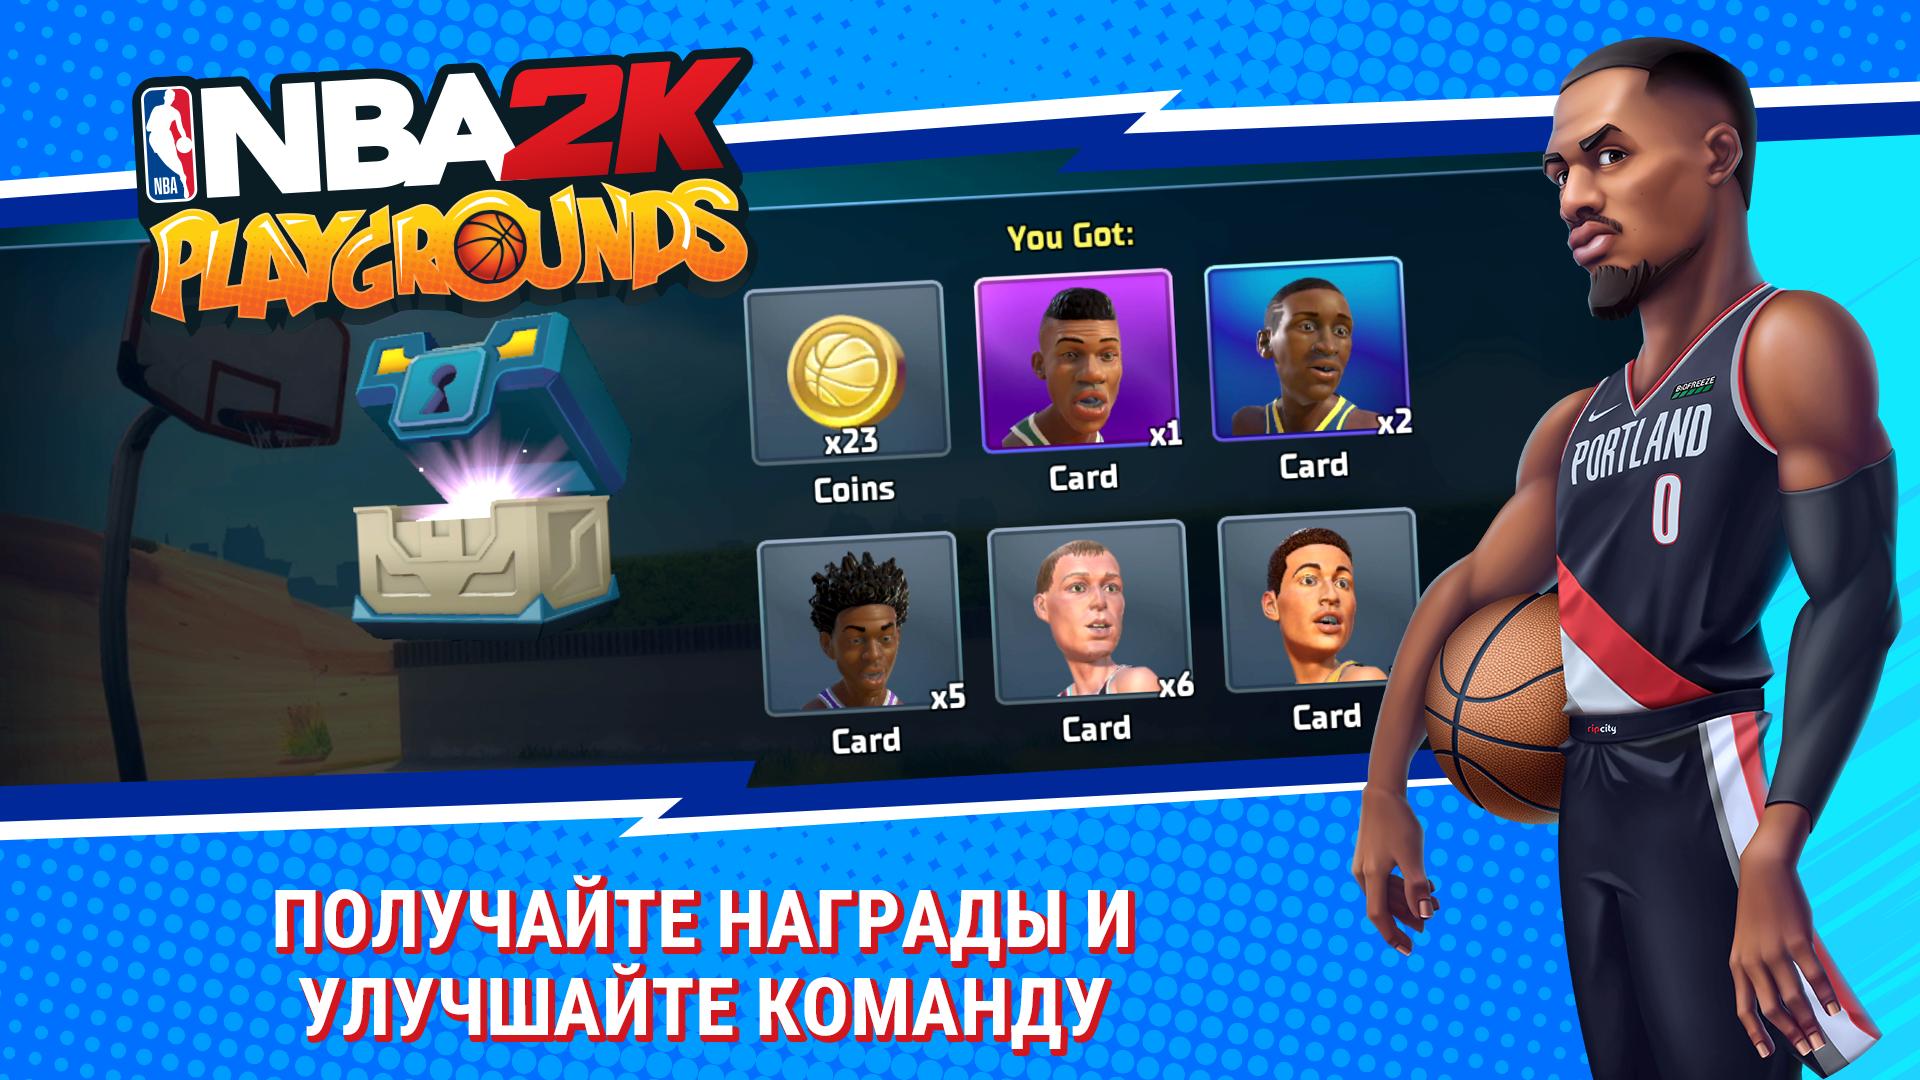 Nba playgrounds steam фото 88